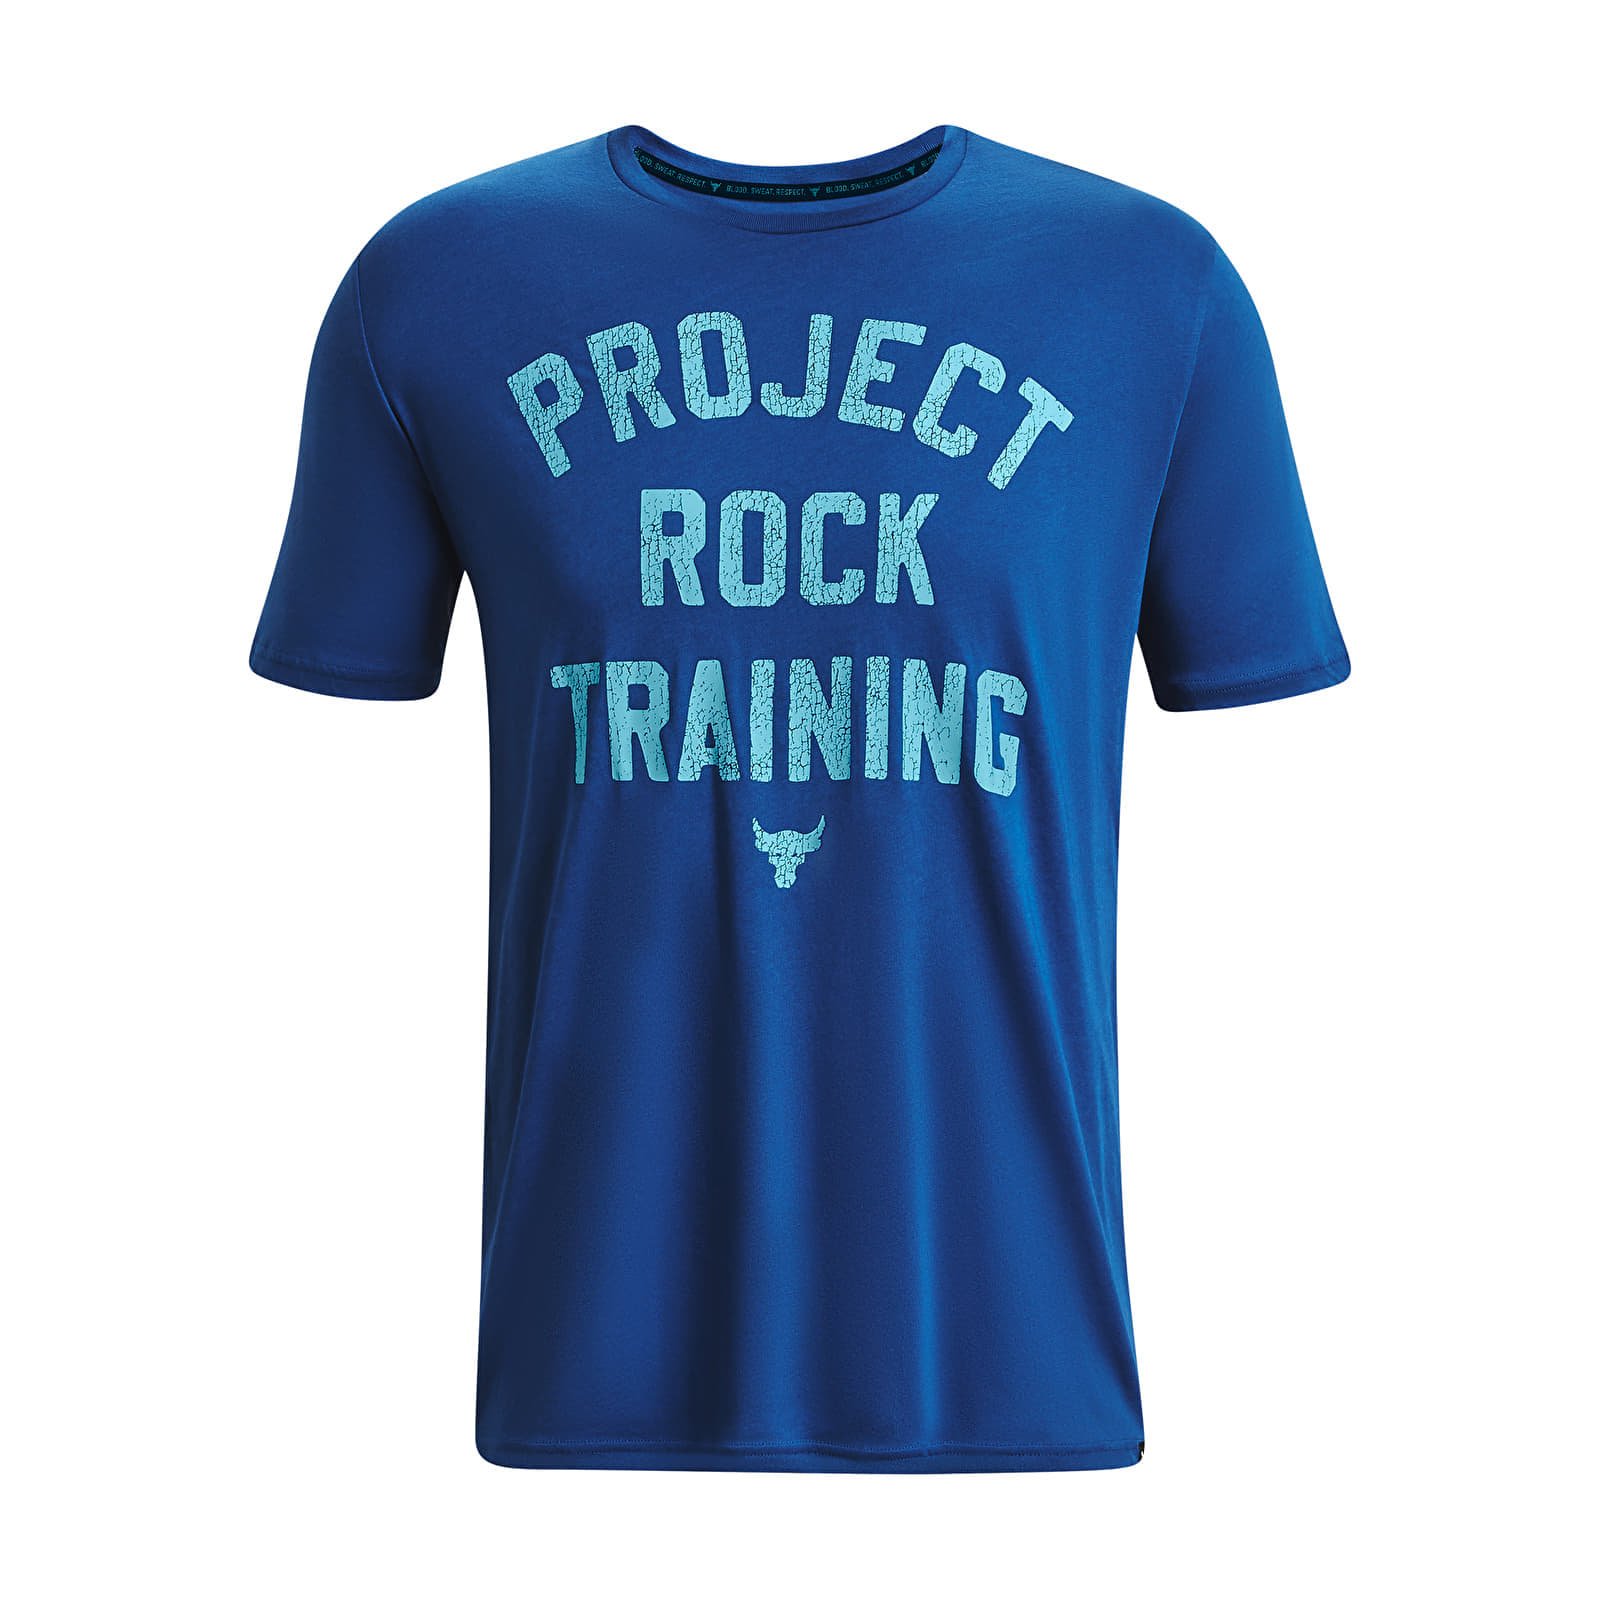 Project Rock Training Ss Blue